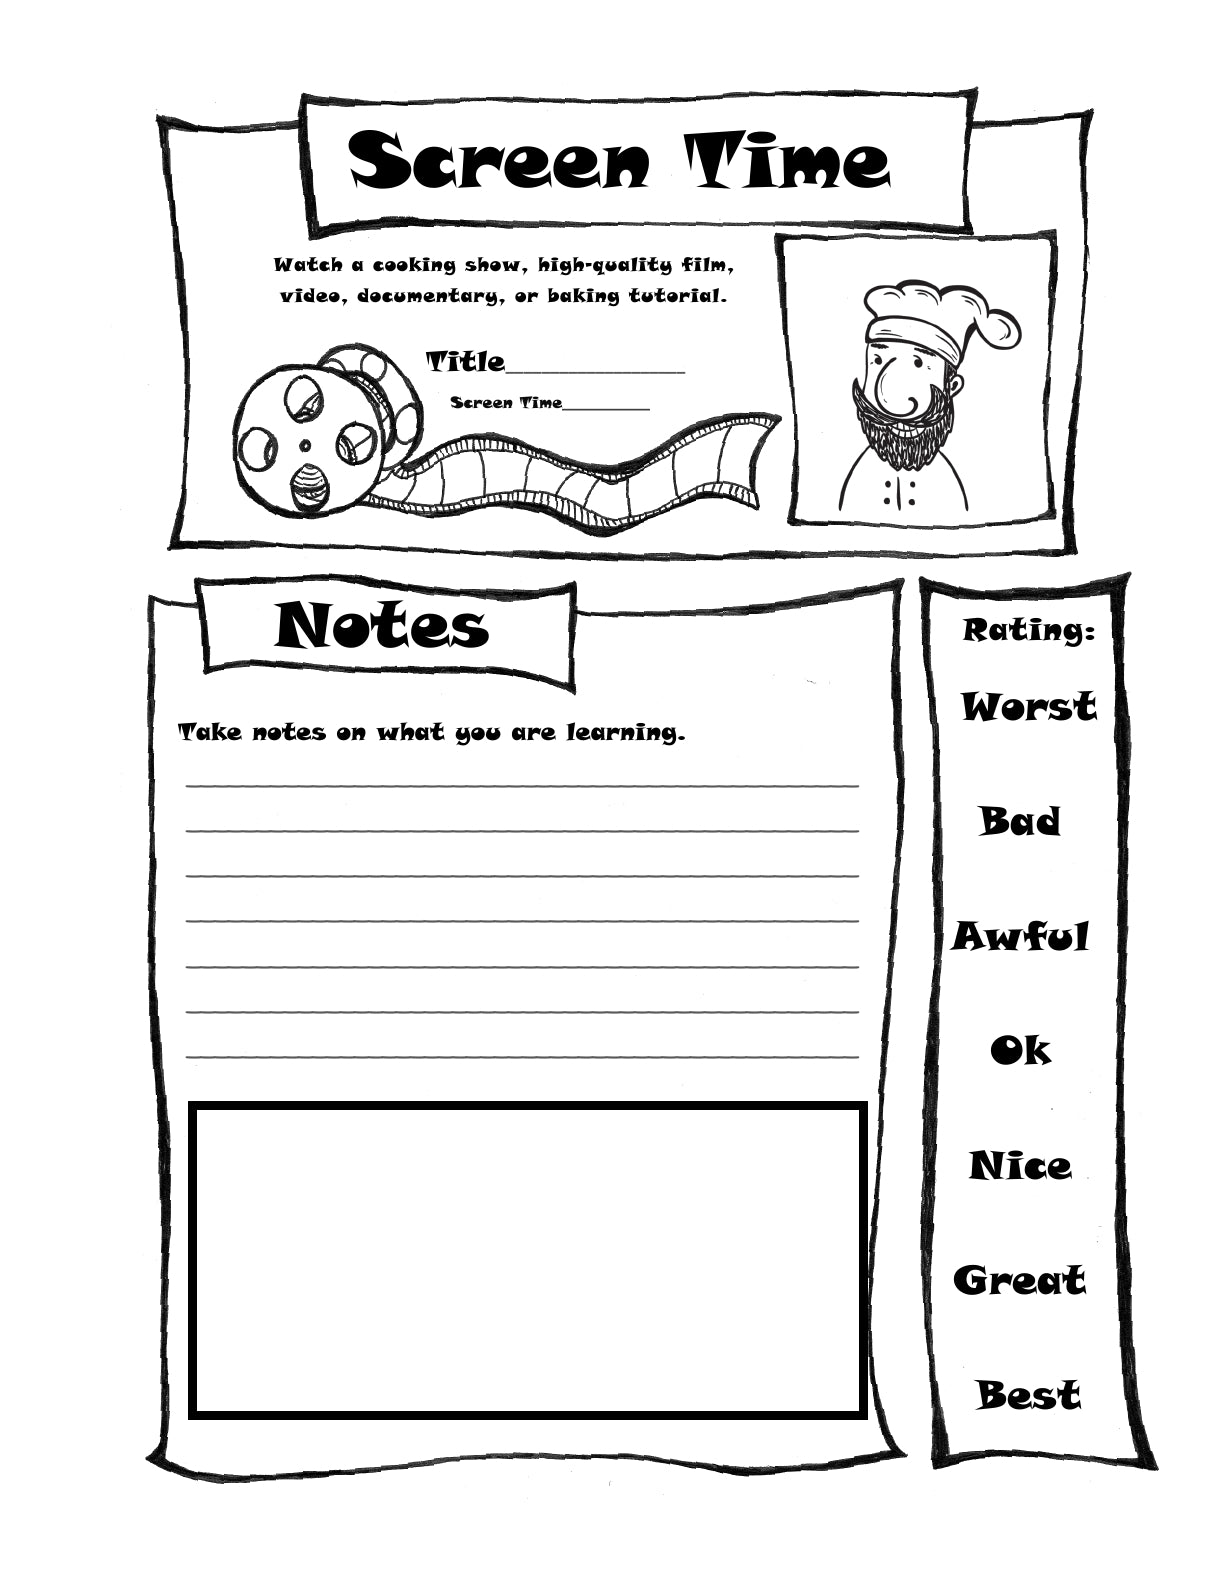 (Age 11+) The Baker's Fun-Schooling Journal